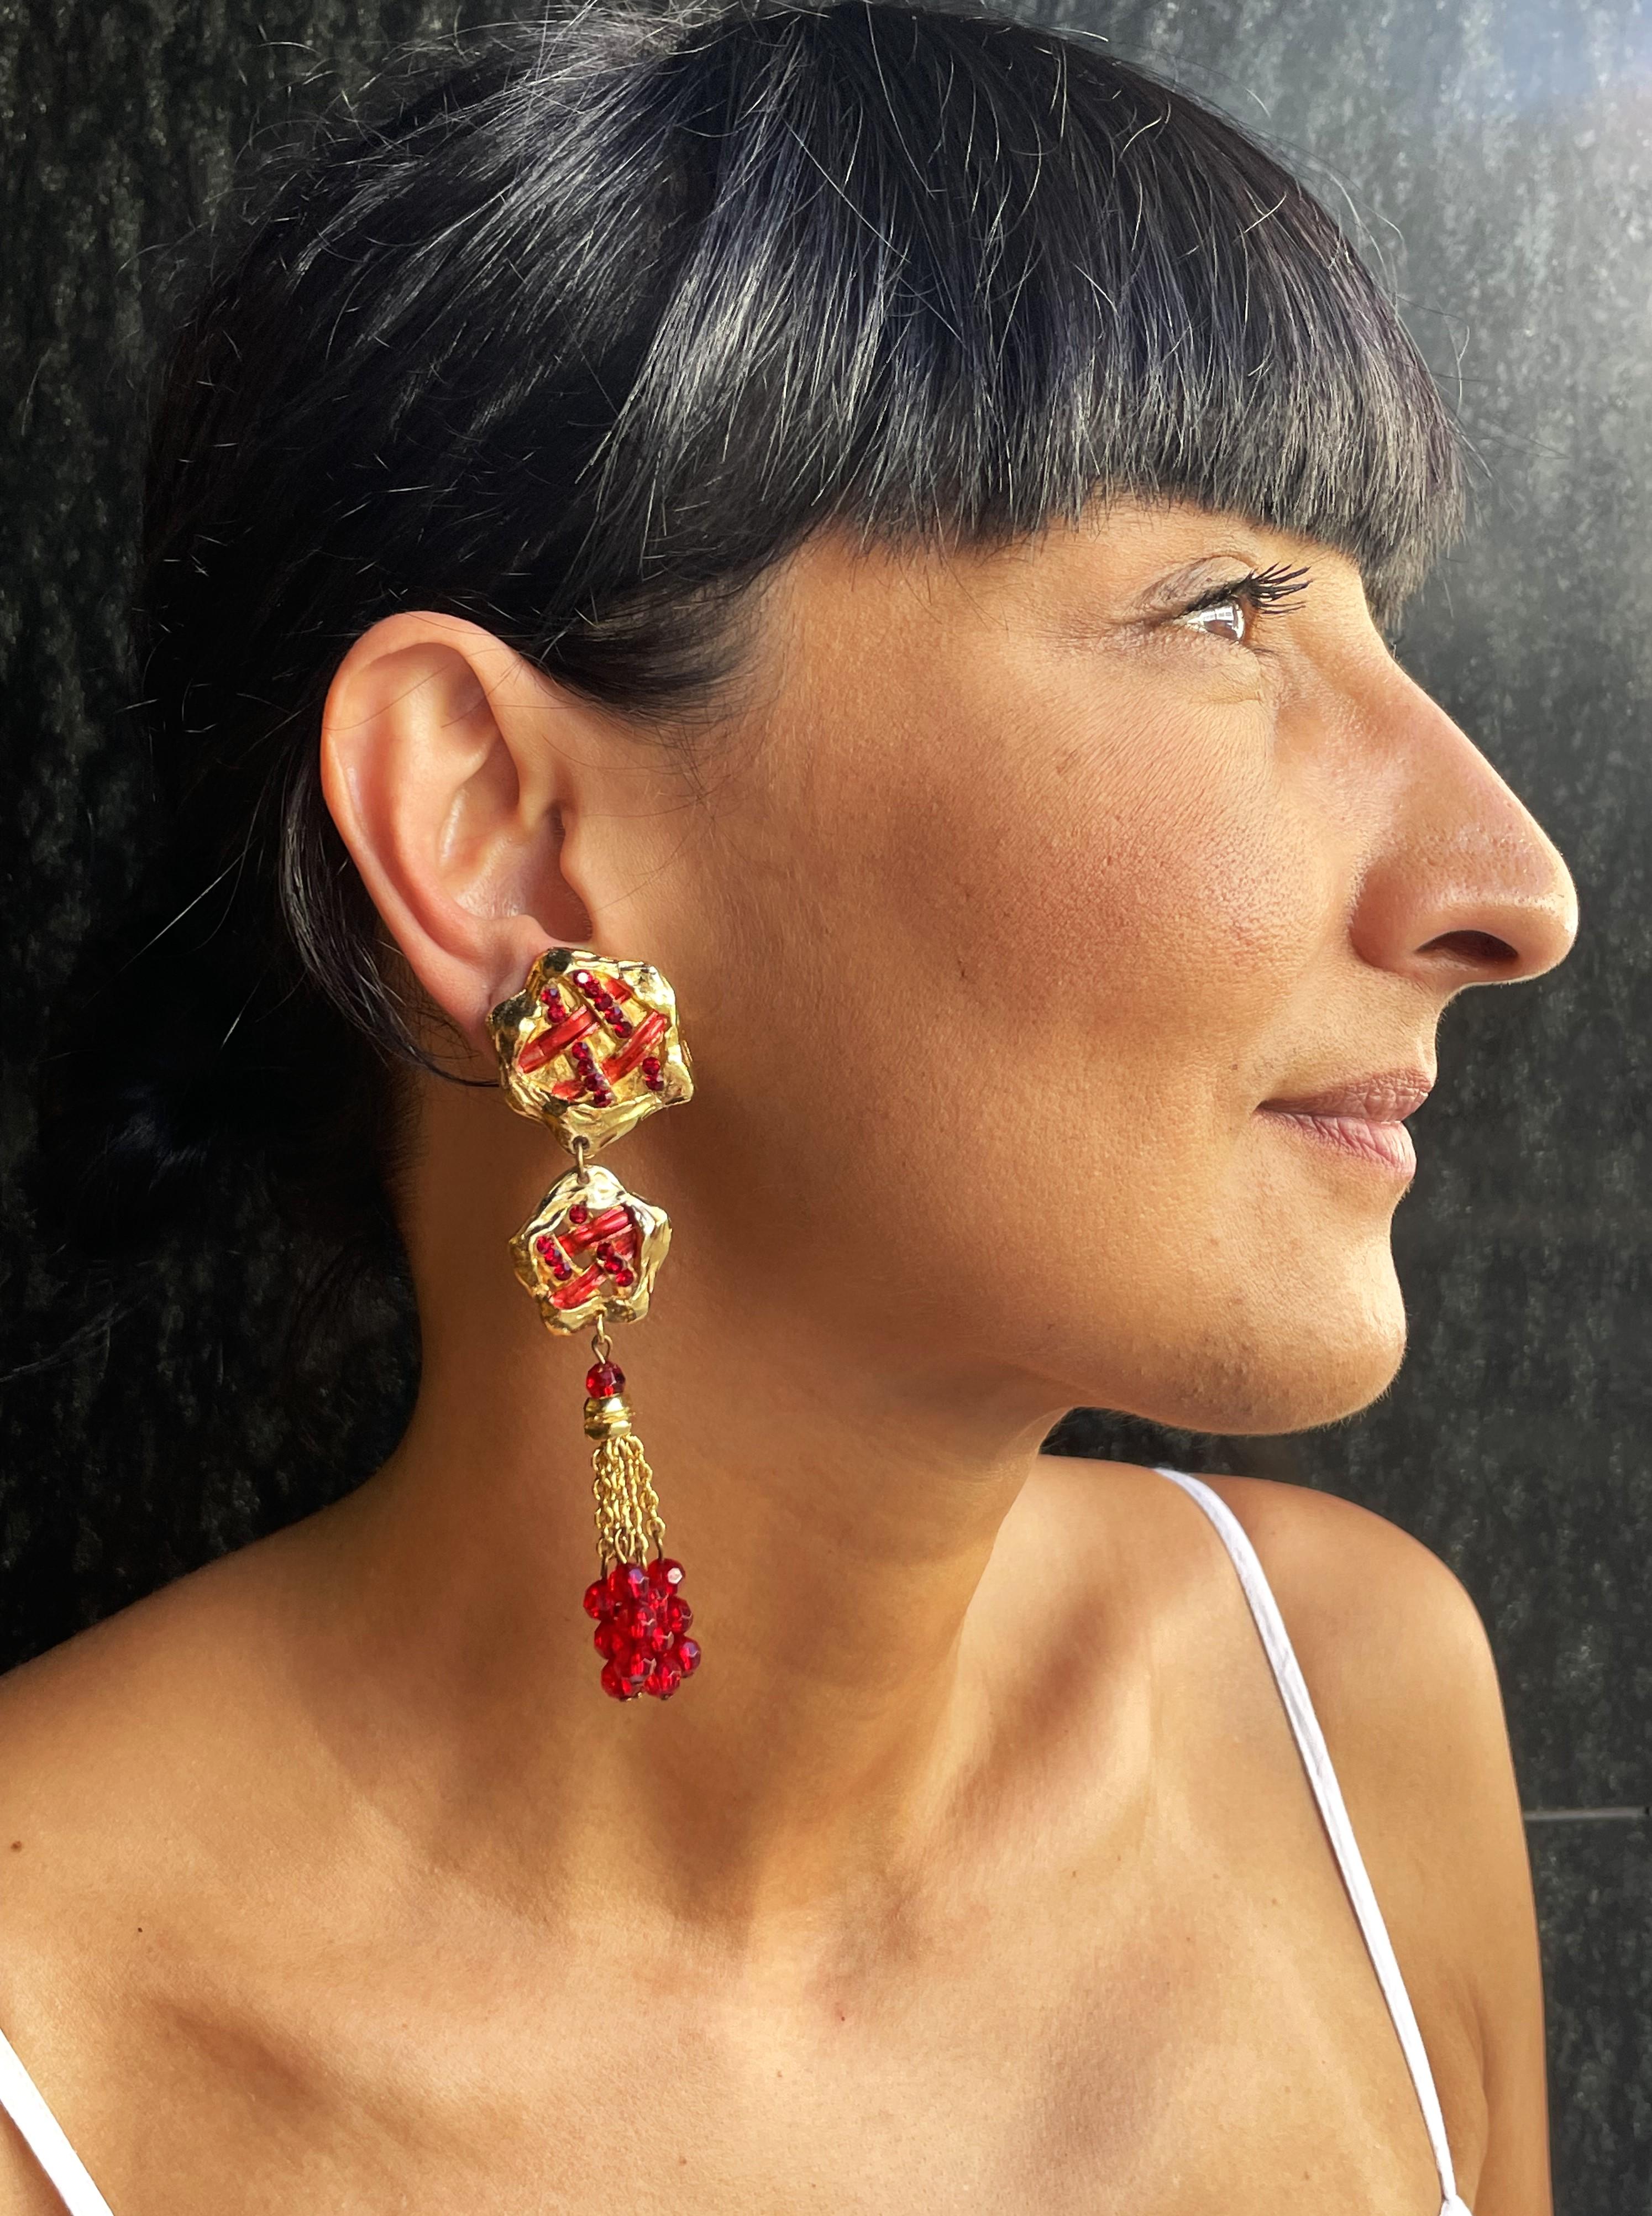 Long ear clips designed by Jacky de G Paris around 2000. They consist of 3 parts, red rhinestones and red enamel.

Measurement
Length 10cm
Width of the upper part 2.8 cm, 
the middle part 2.3 cm wide,
 the third part with 5 small red rhinestone